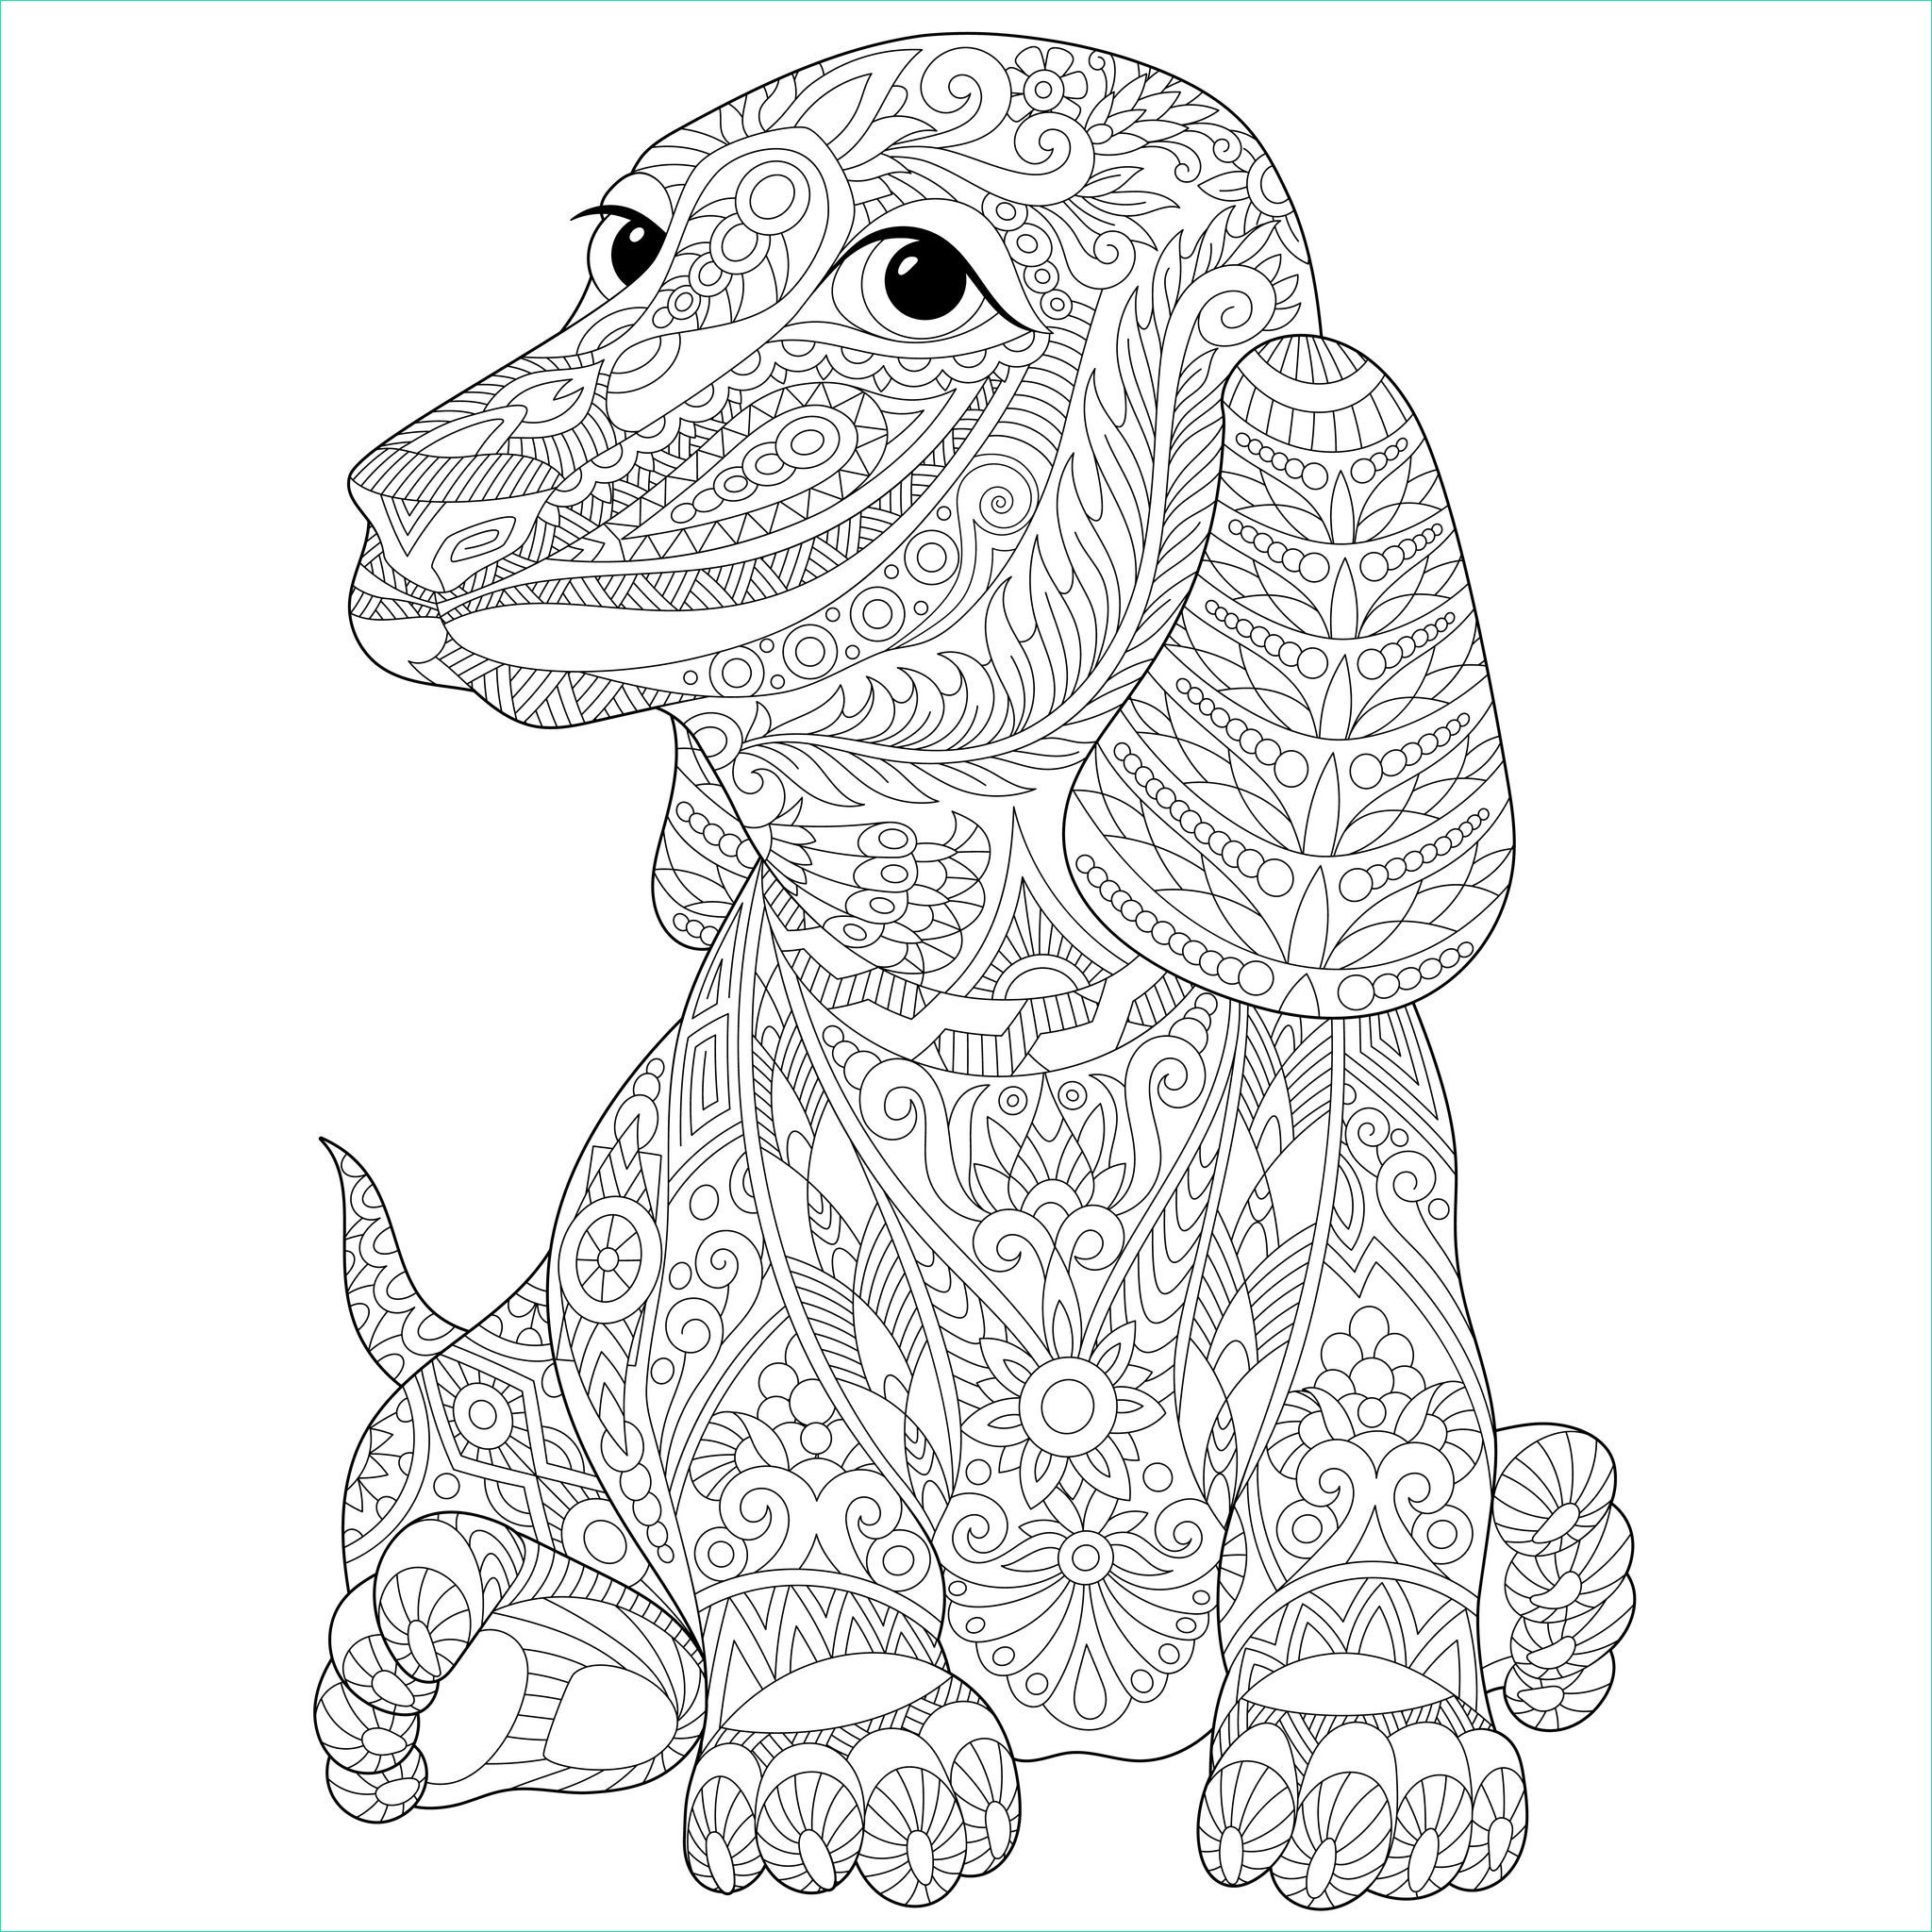 Mandala Animaux Chien Inspirant Collection 15 Unique De Coloriage Mandala Chien Image Coloriage